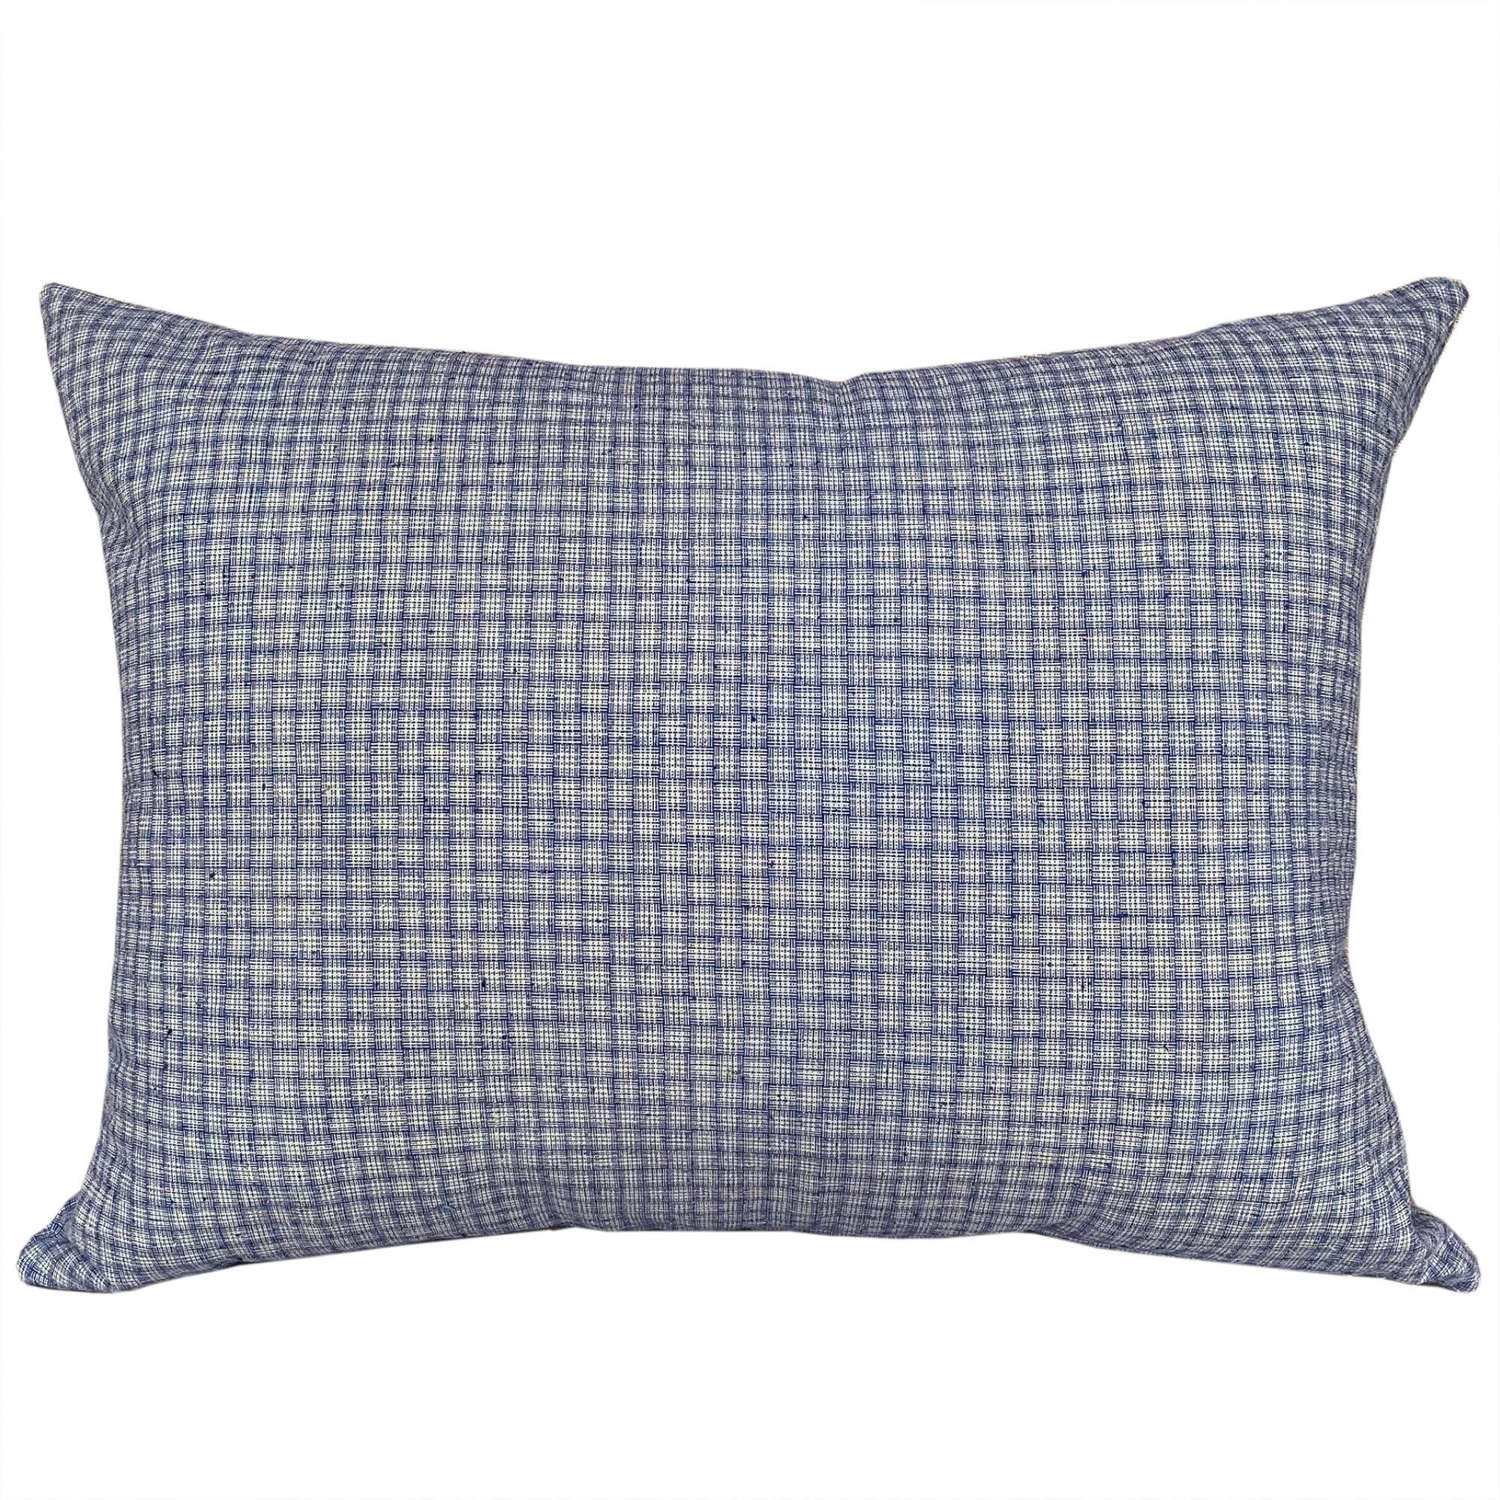 Blue And White Basket Weave Cushions